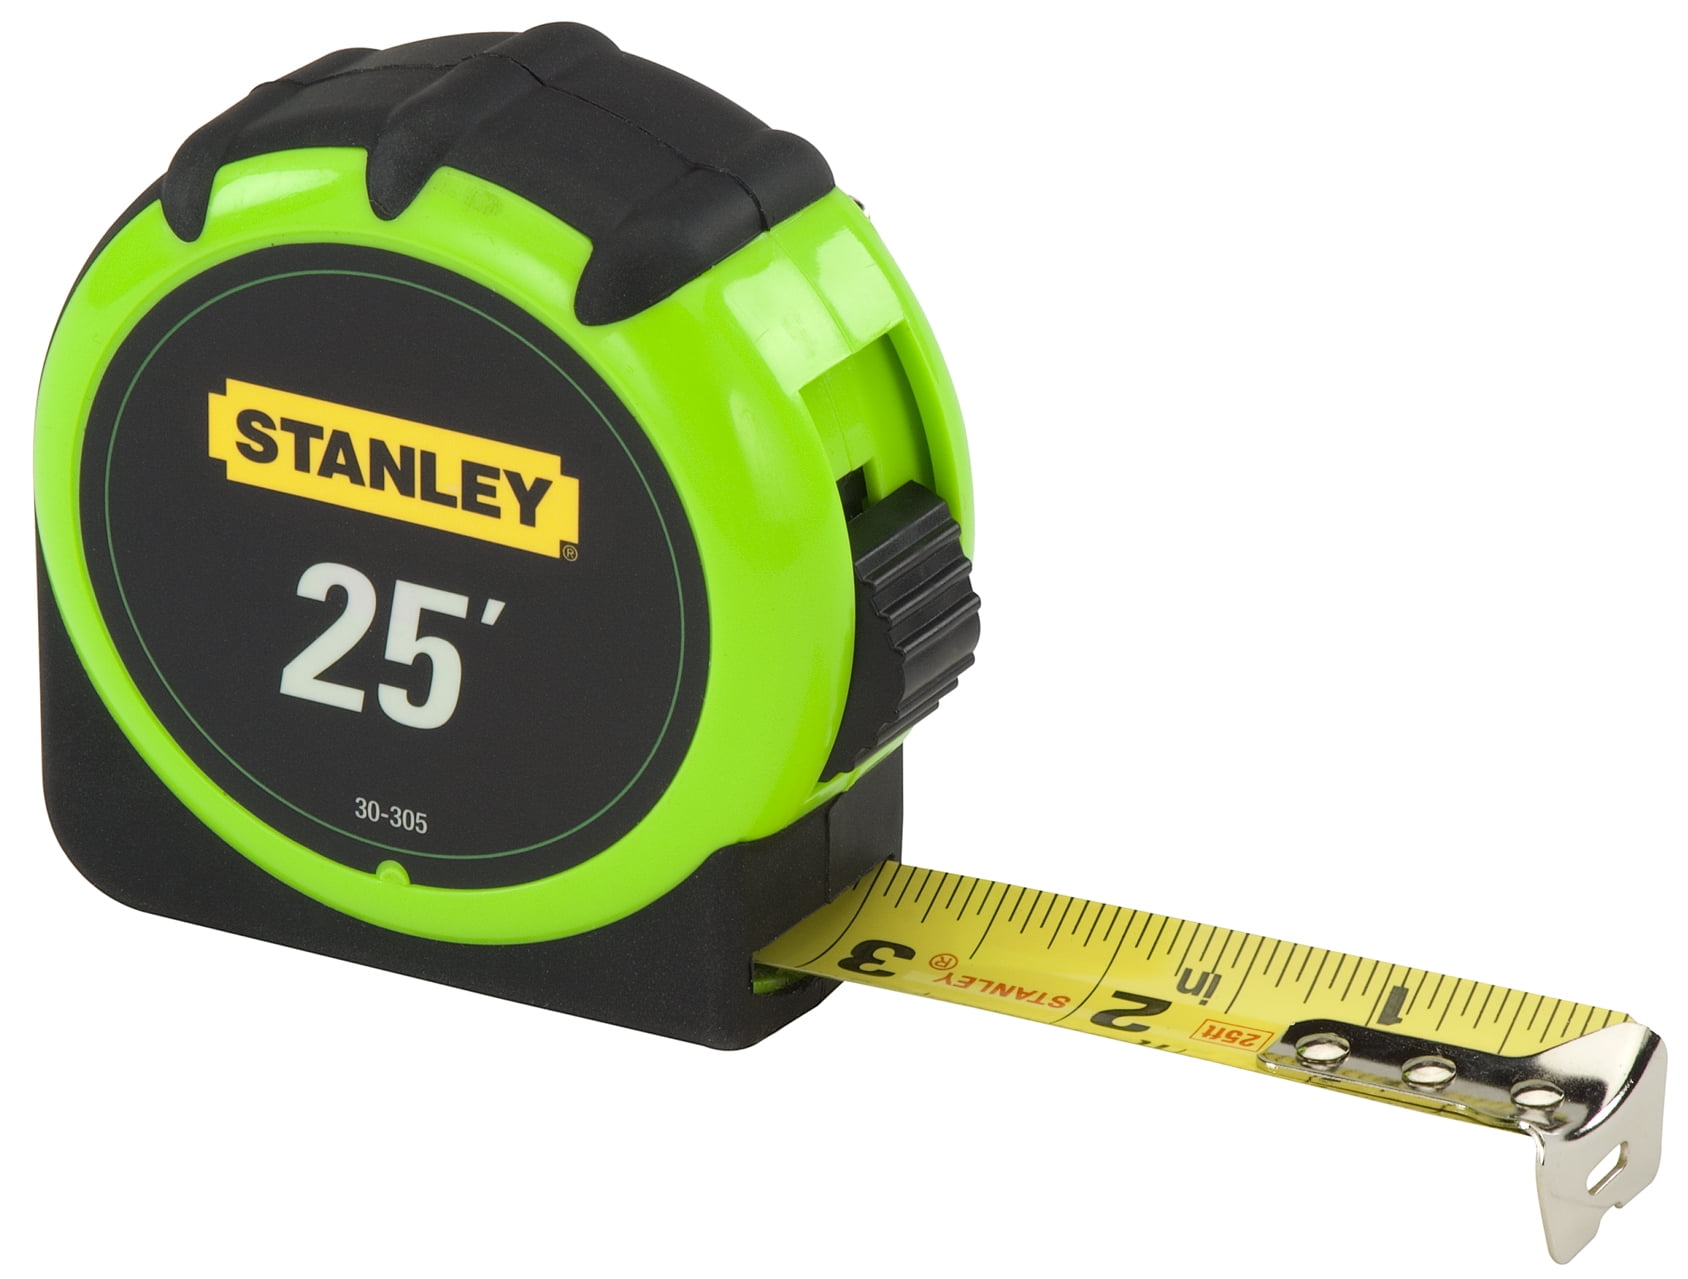 STANLEY Tape Measure,1 In x 25 ft,Yellow,In./Ft. 30-454